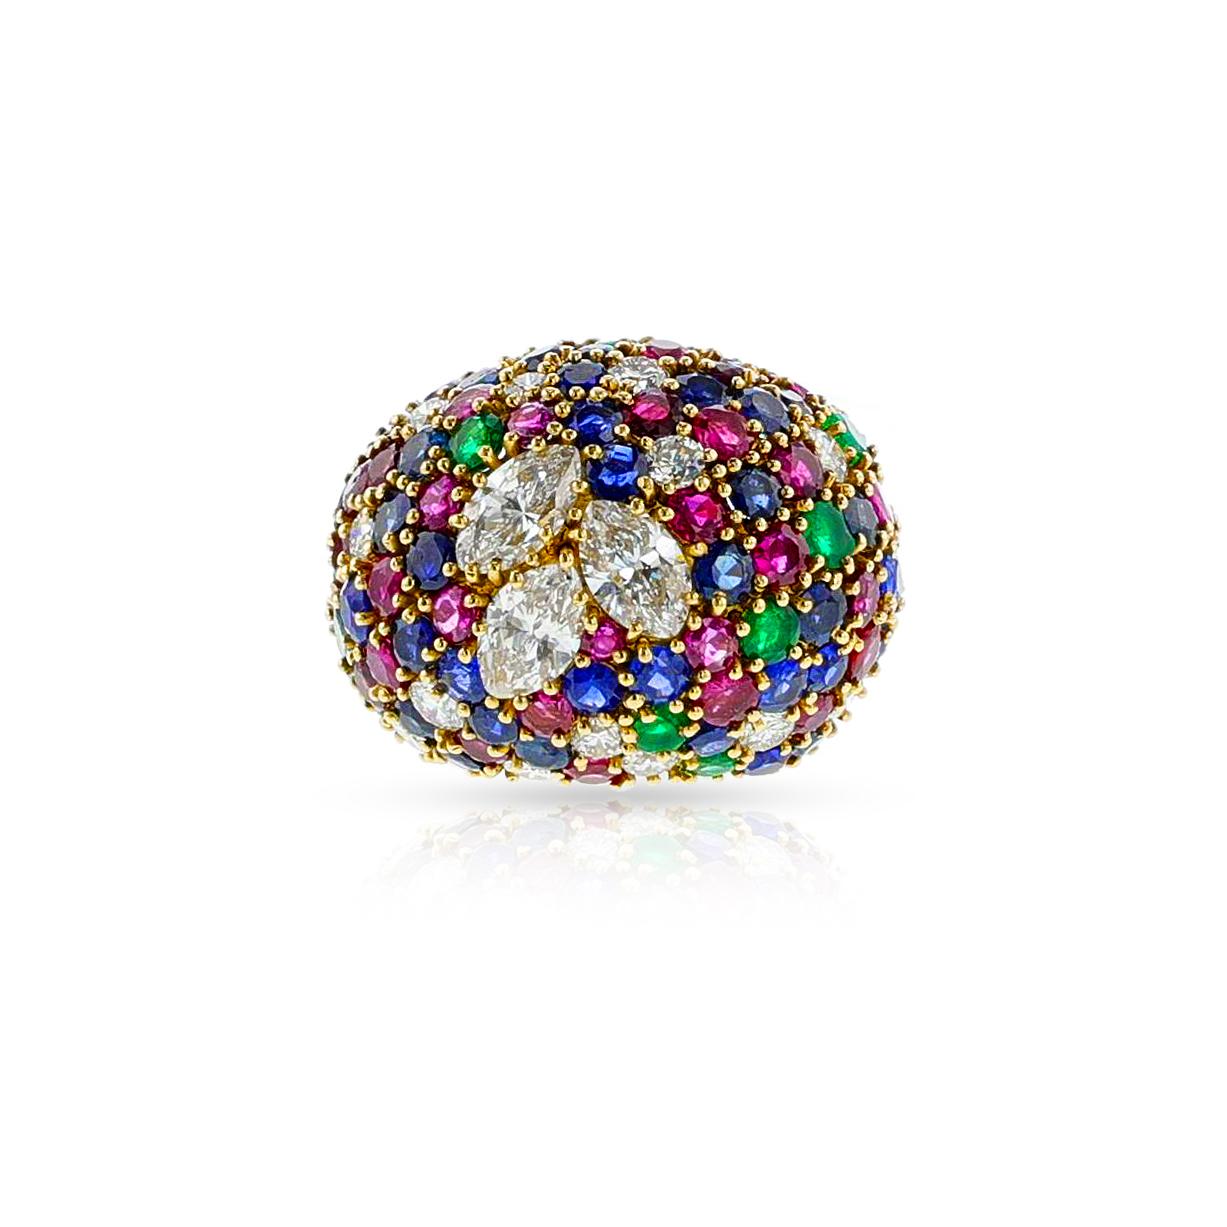 Crafted in elegant 18 karat yellow gold, this luxurious Bombe Ring is adorned with glimmering round-shape ruby, emerald, sapphire and marquise diamonds, weighing in at approximately 3 carats. Possessing a weight of 20.59 grams, this splendid ring is